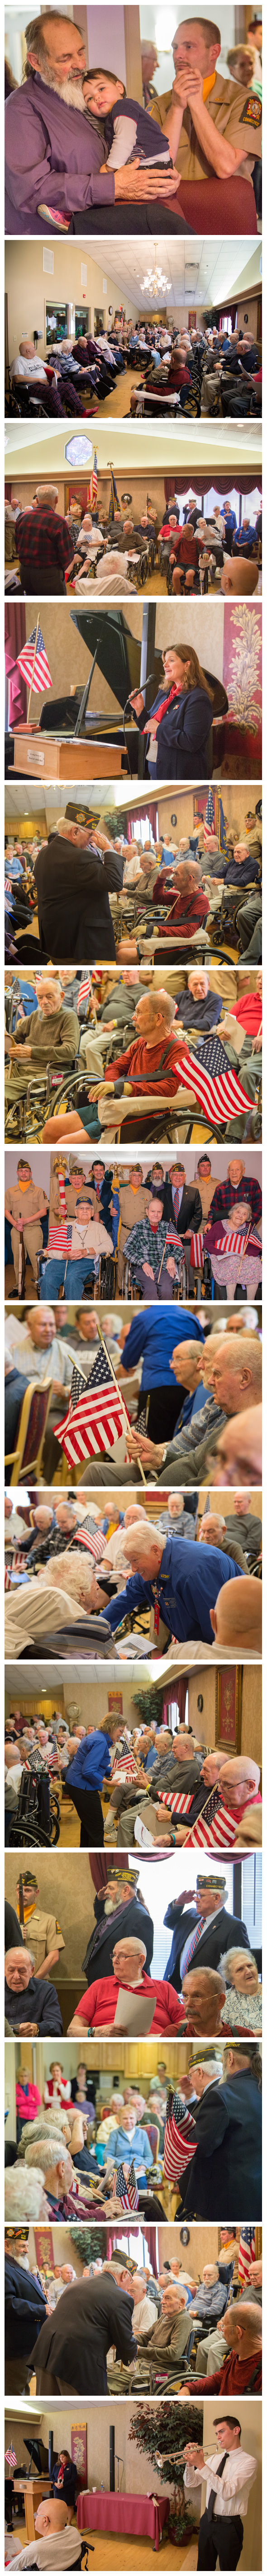 image of Veterans Day service at Westview